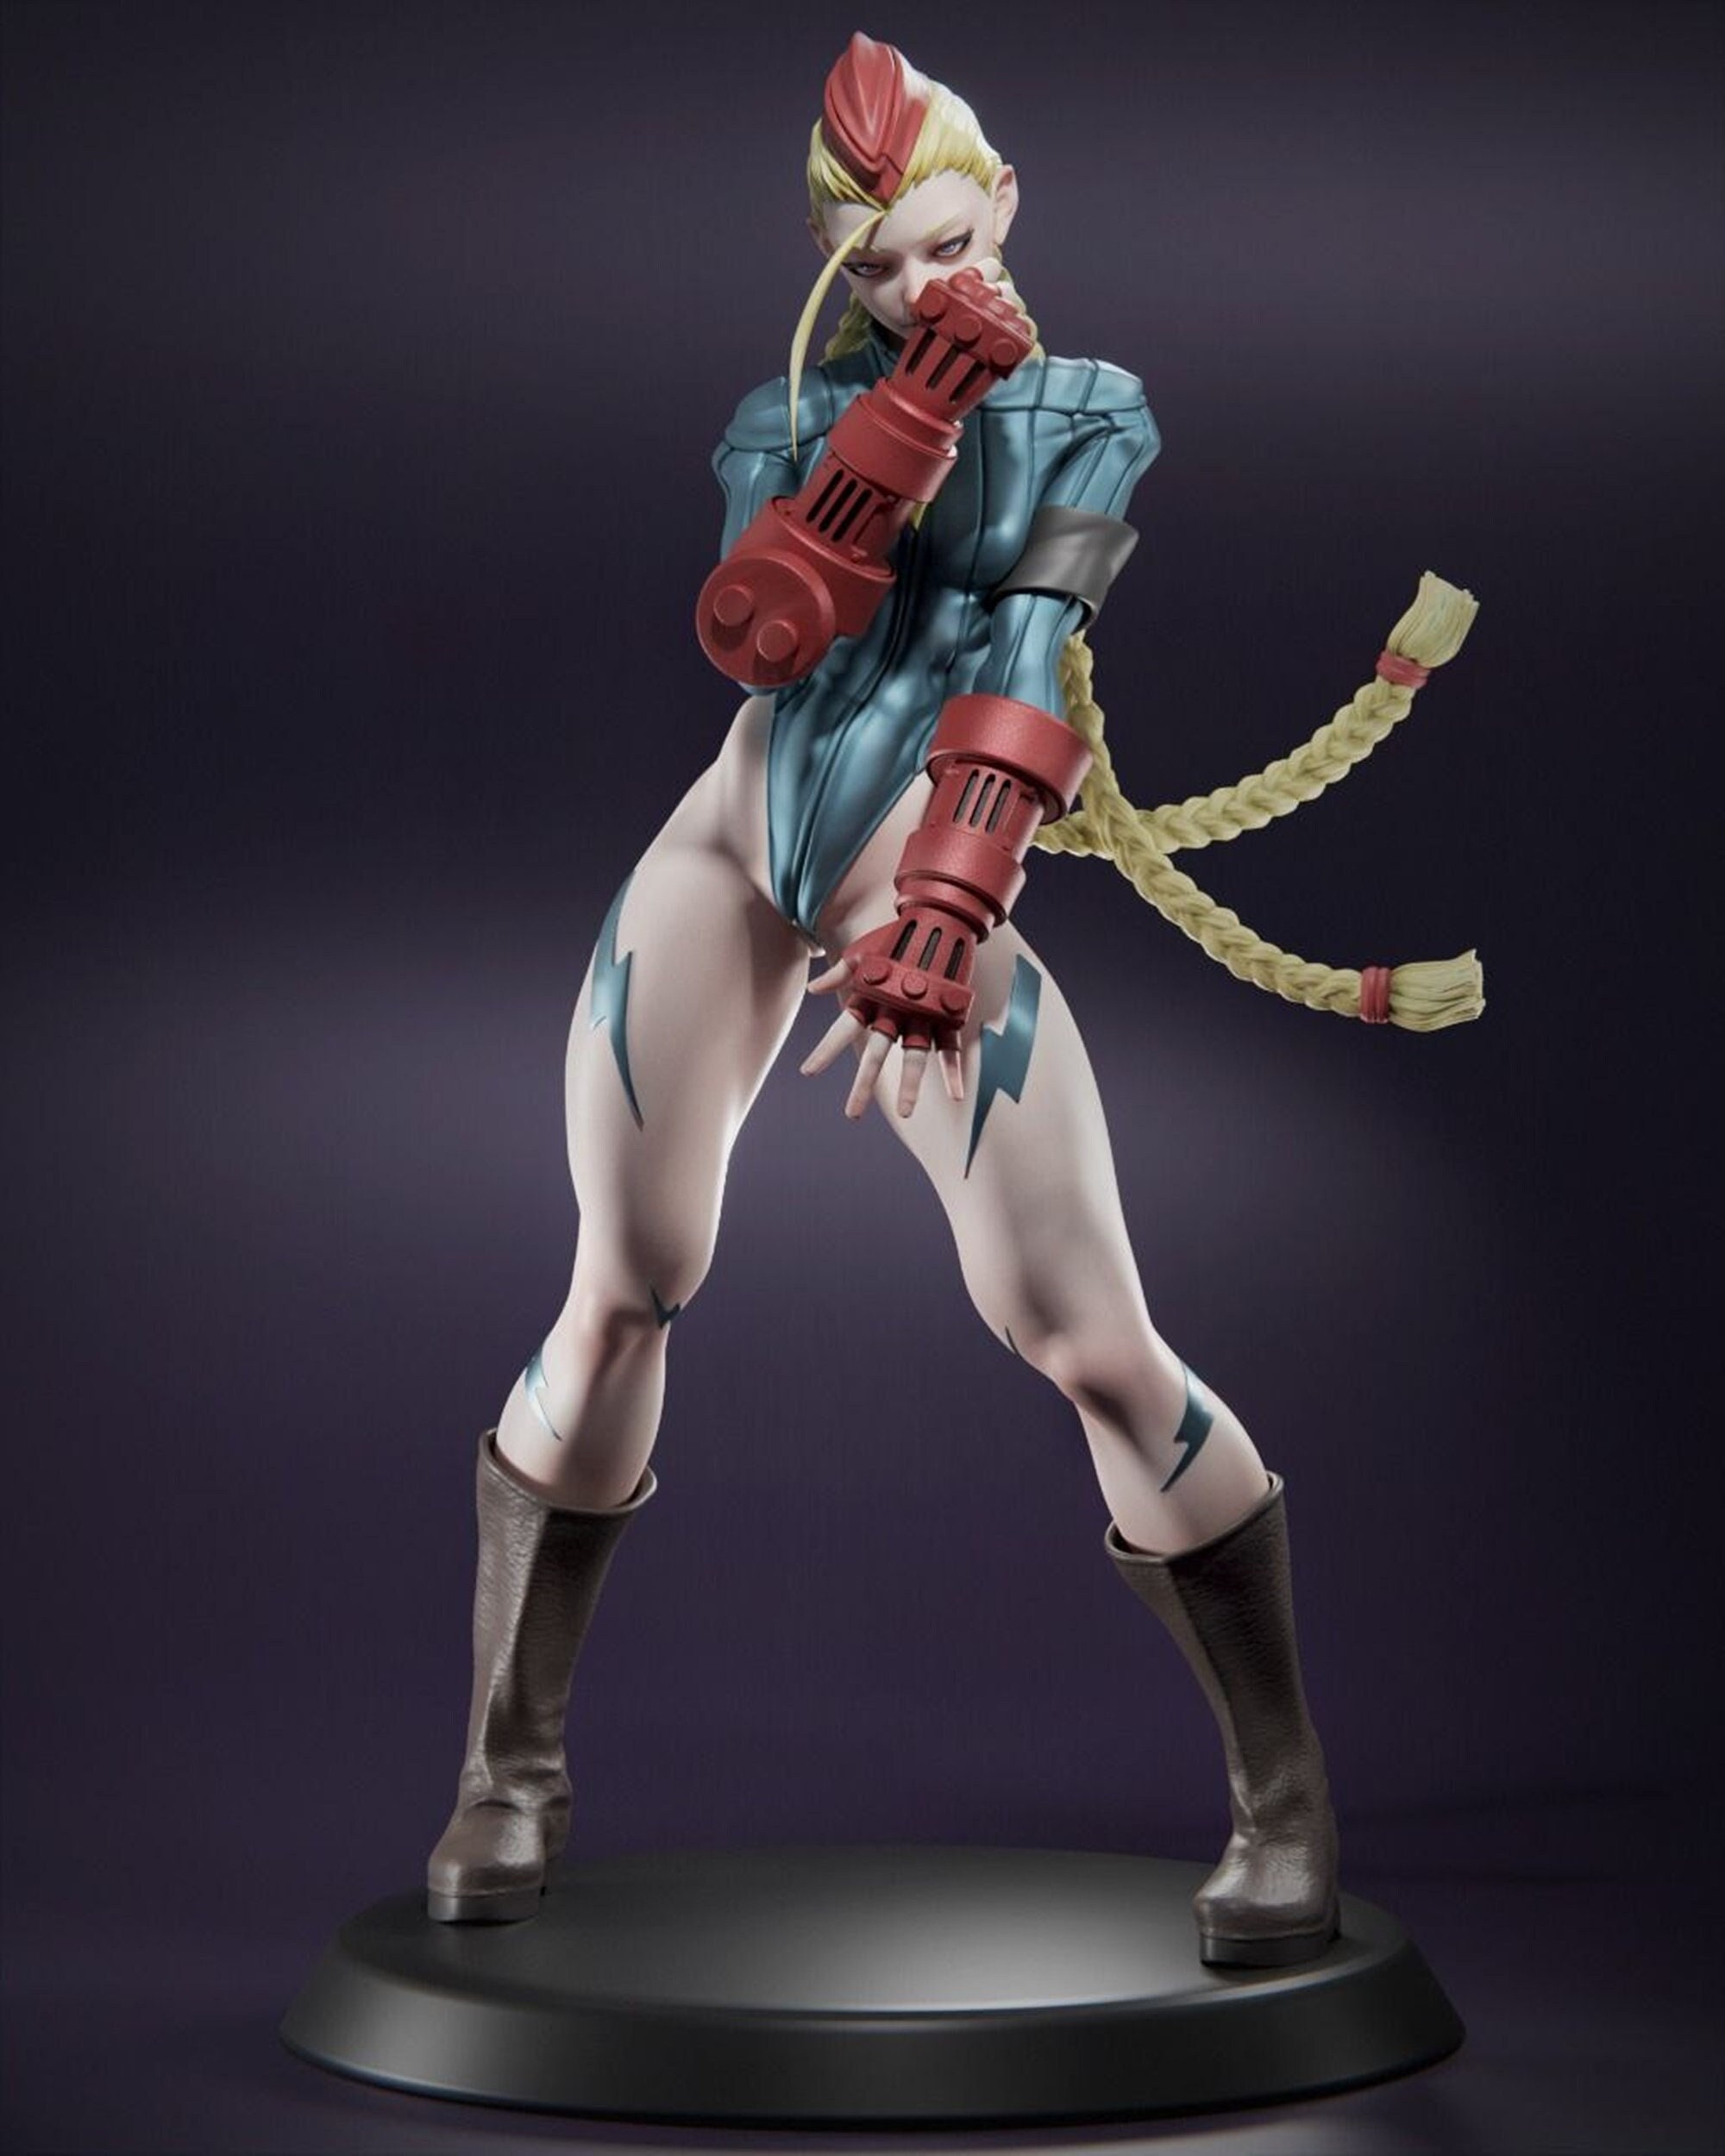 Cammy White New Look (Fanart by me) : r/StreetFighter